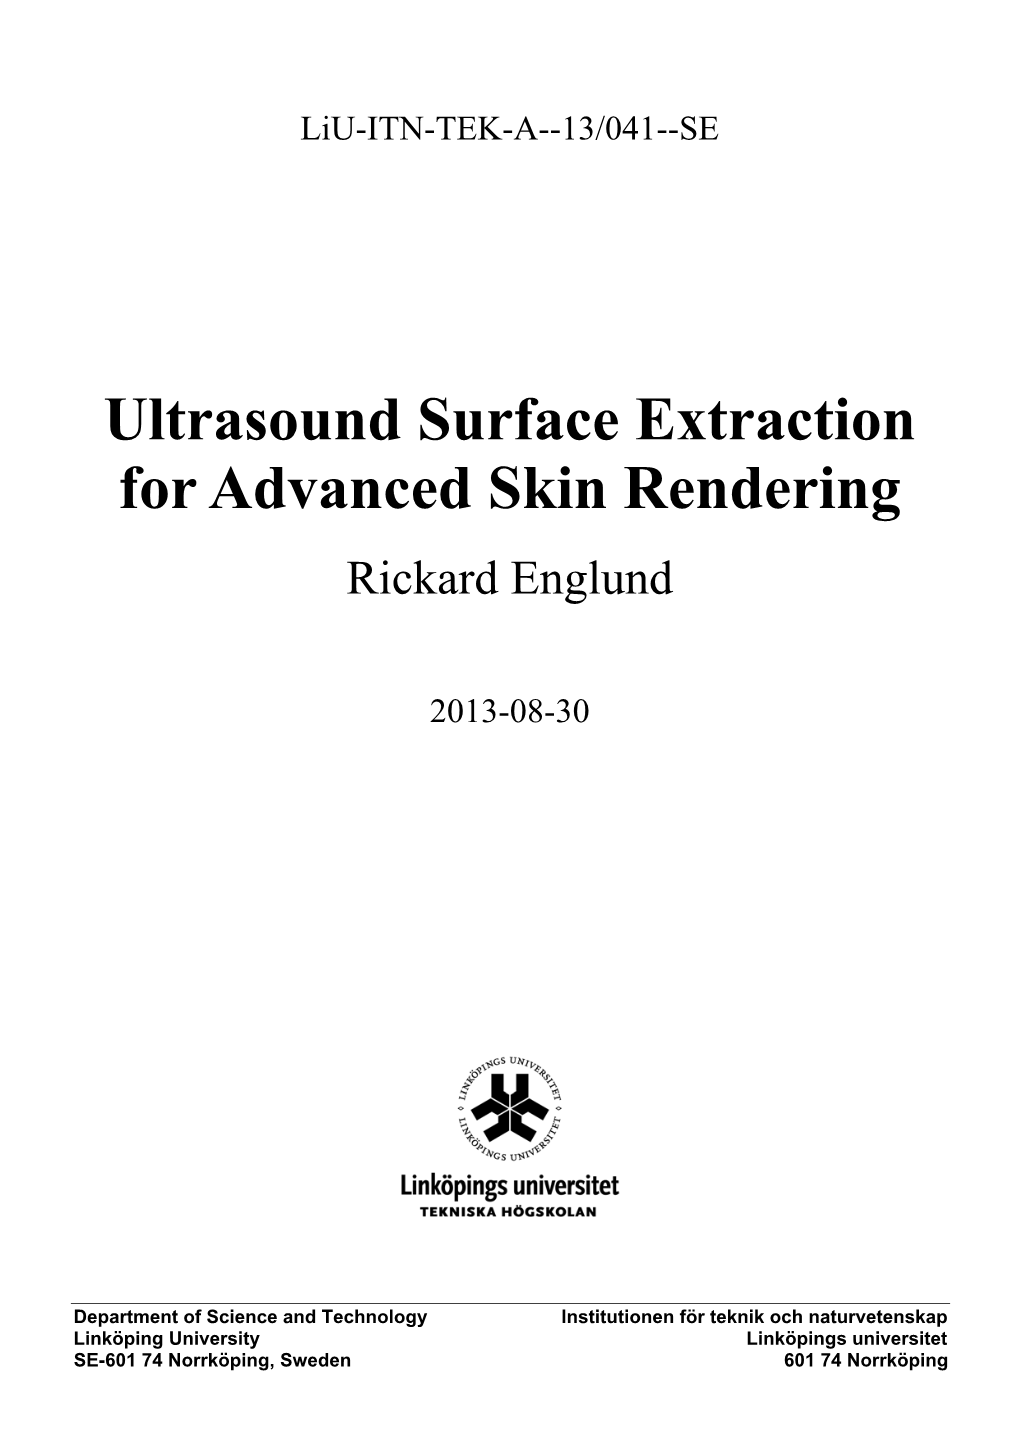 Ultrasound Surface Extraction for Advanced Skin Rendering Rickard Englund